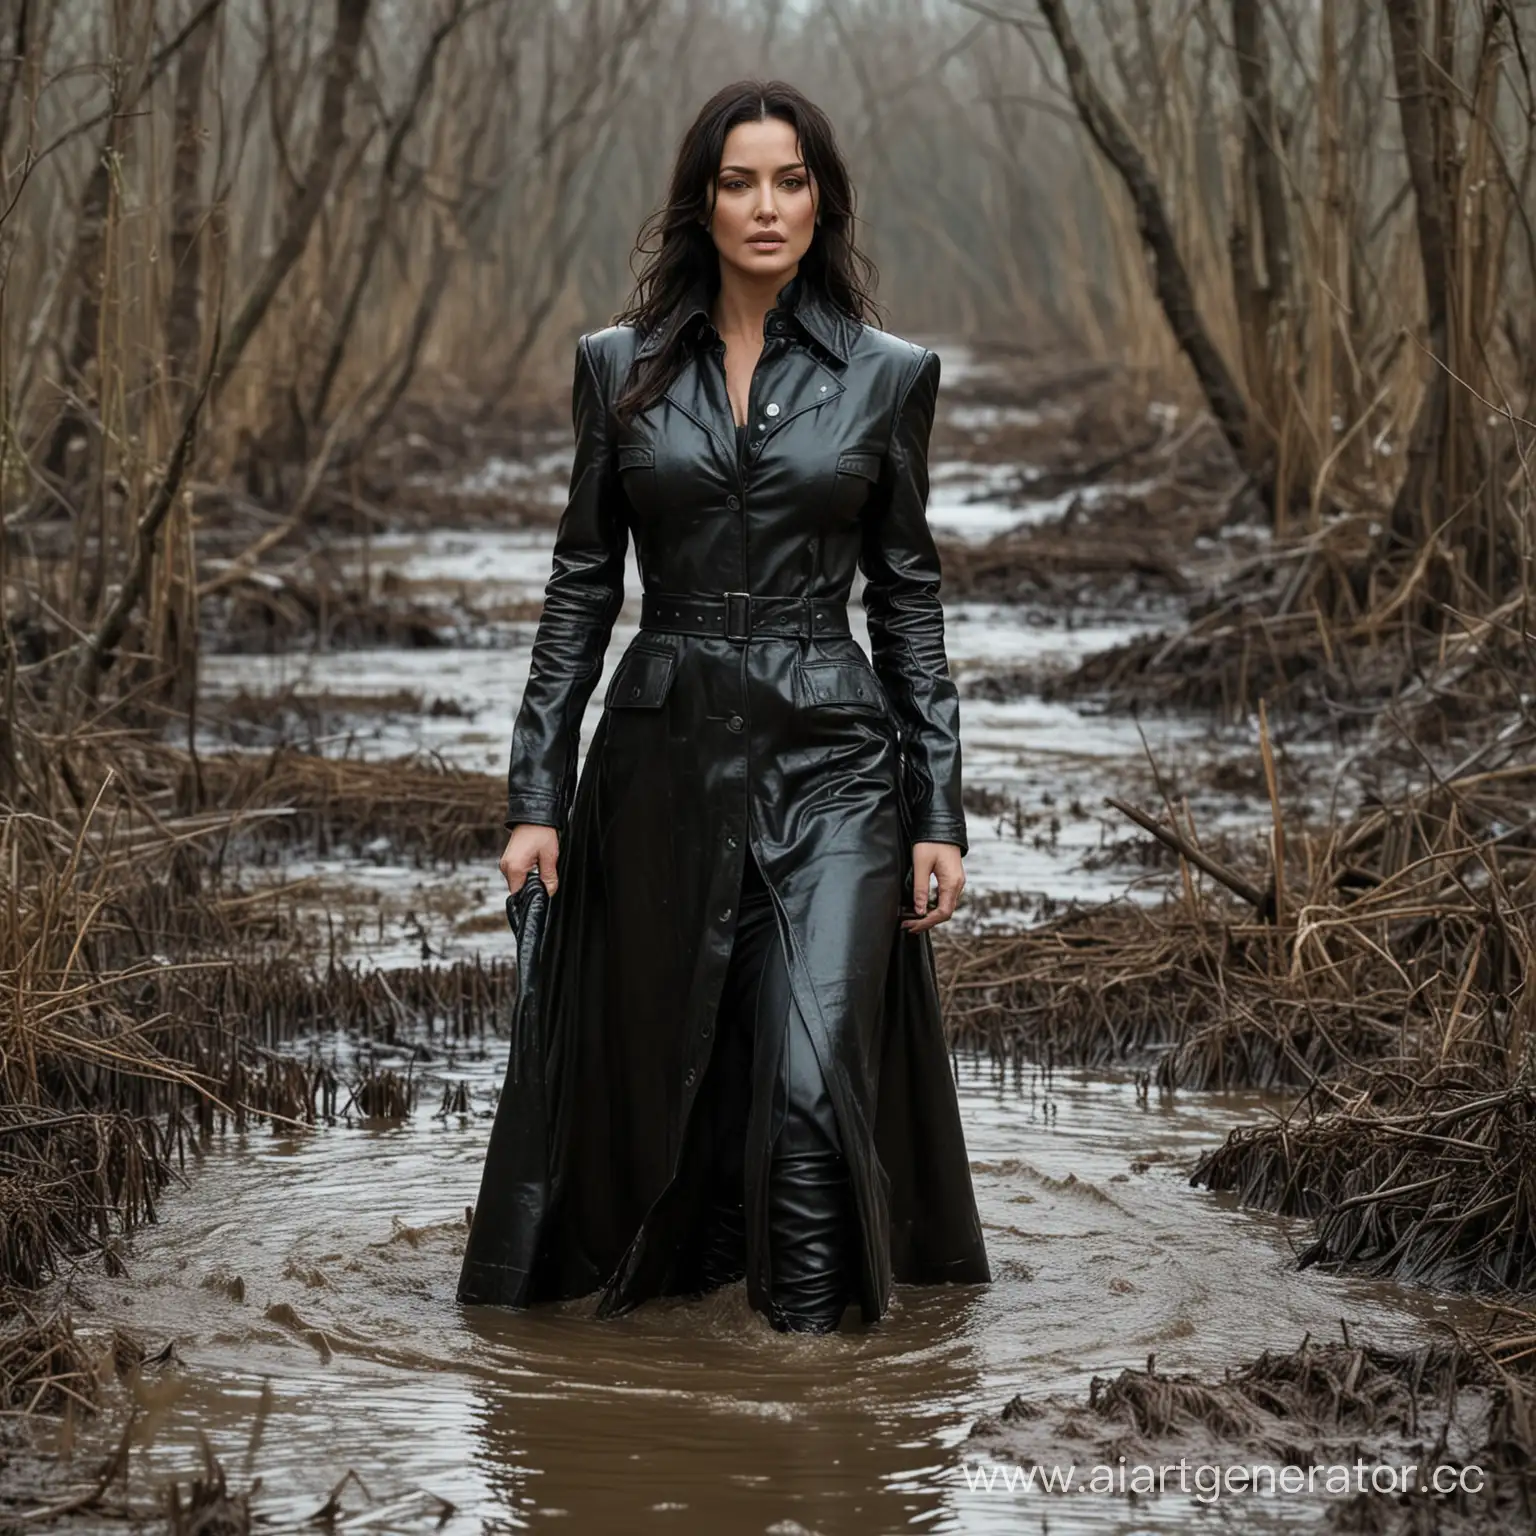 Monica Bellucci in a very dirty long leather coat is trying to get out of a swampy swamp dirty